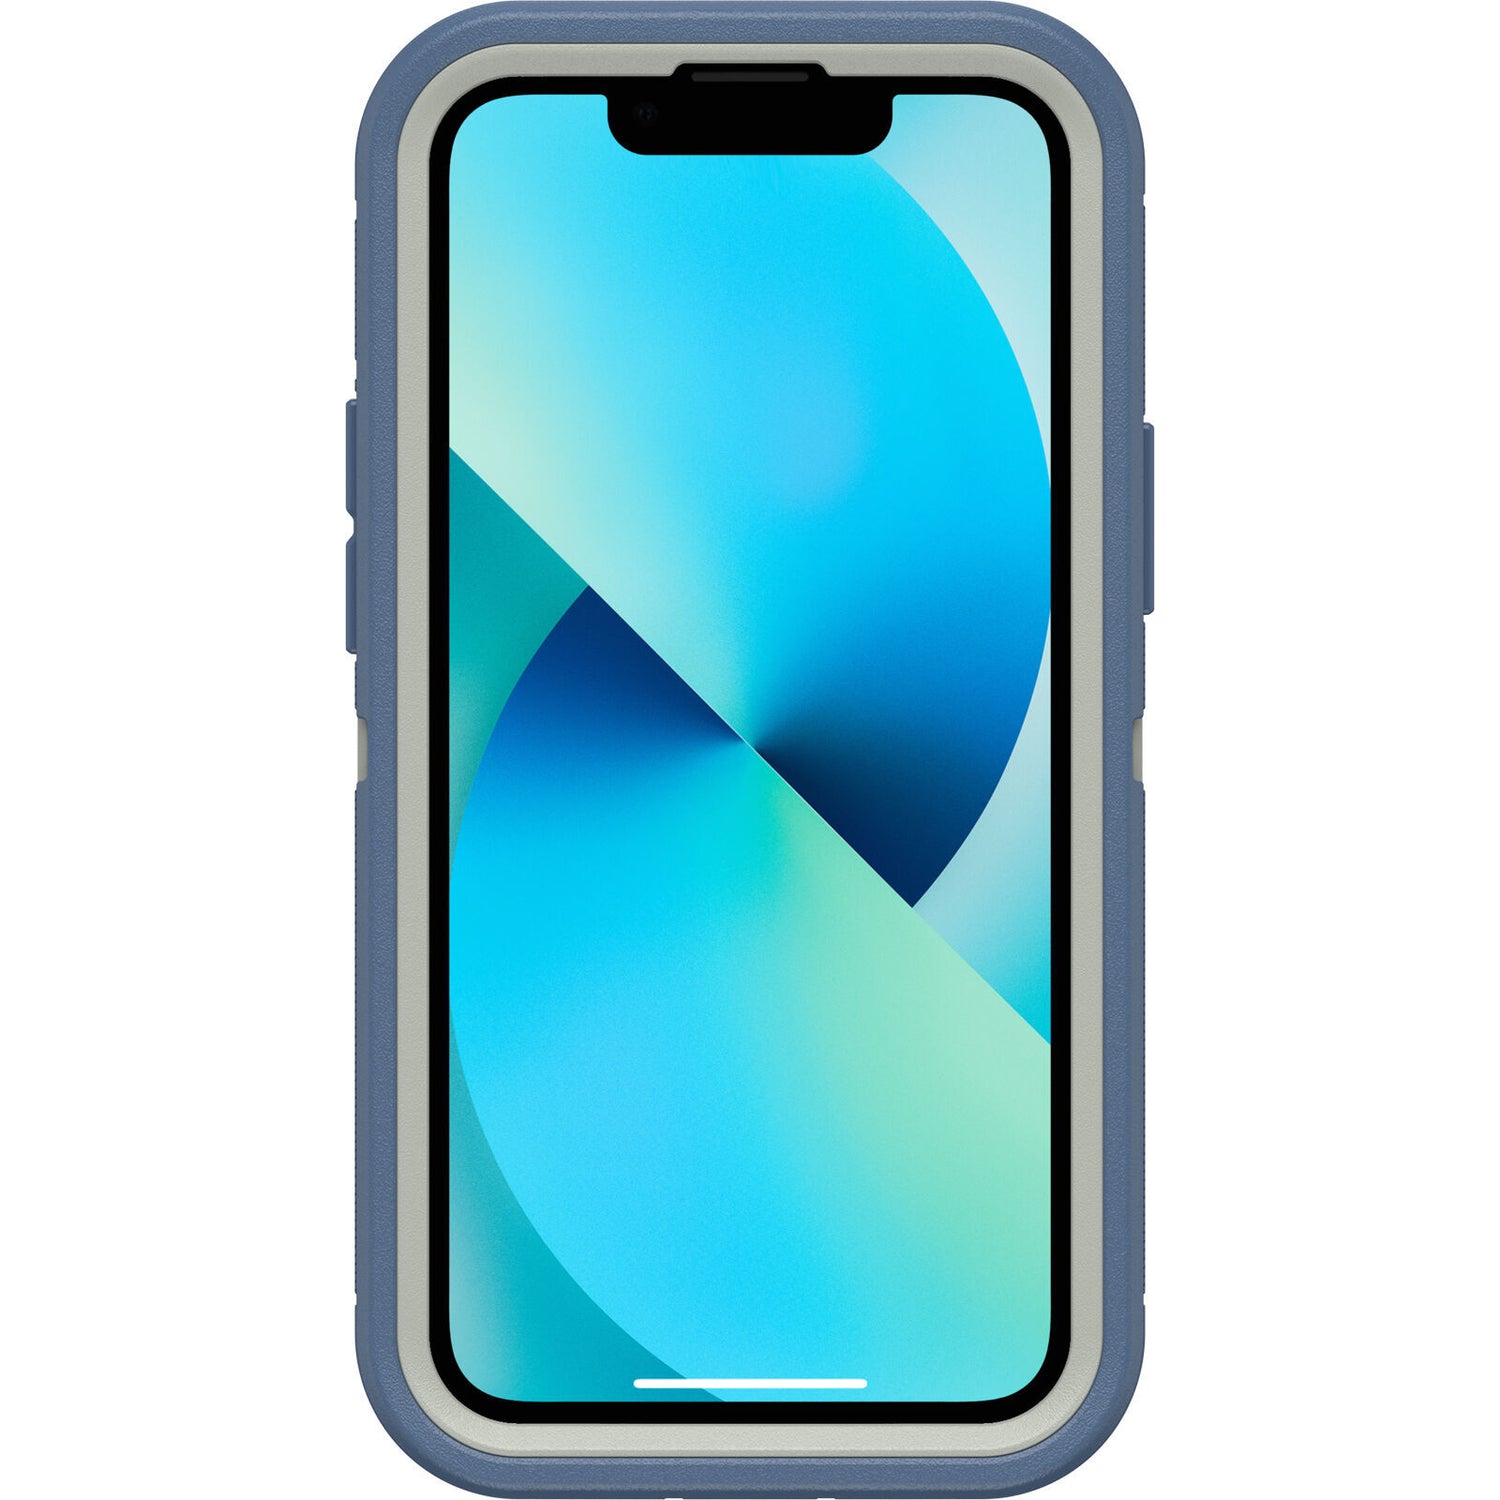 OtterBox DEFENDER SERIES Case &amp; Holster for Apple iPhone 13 Mini - Blue (New)